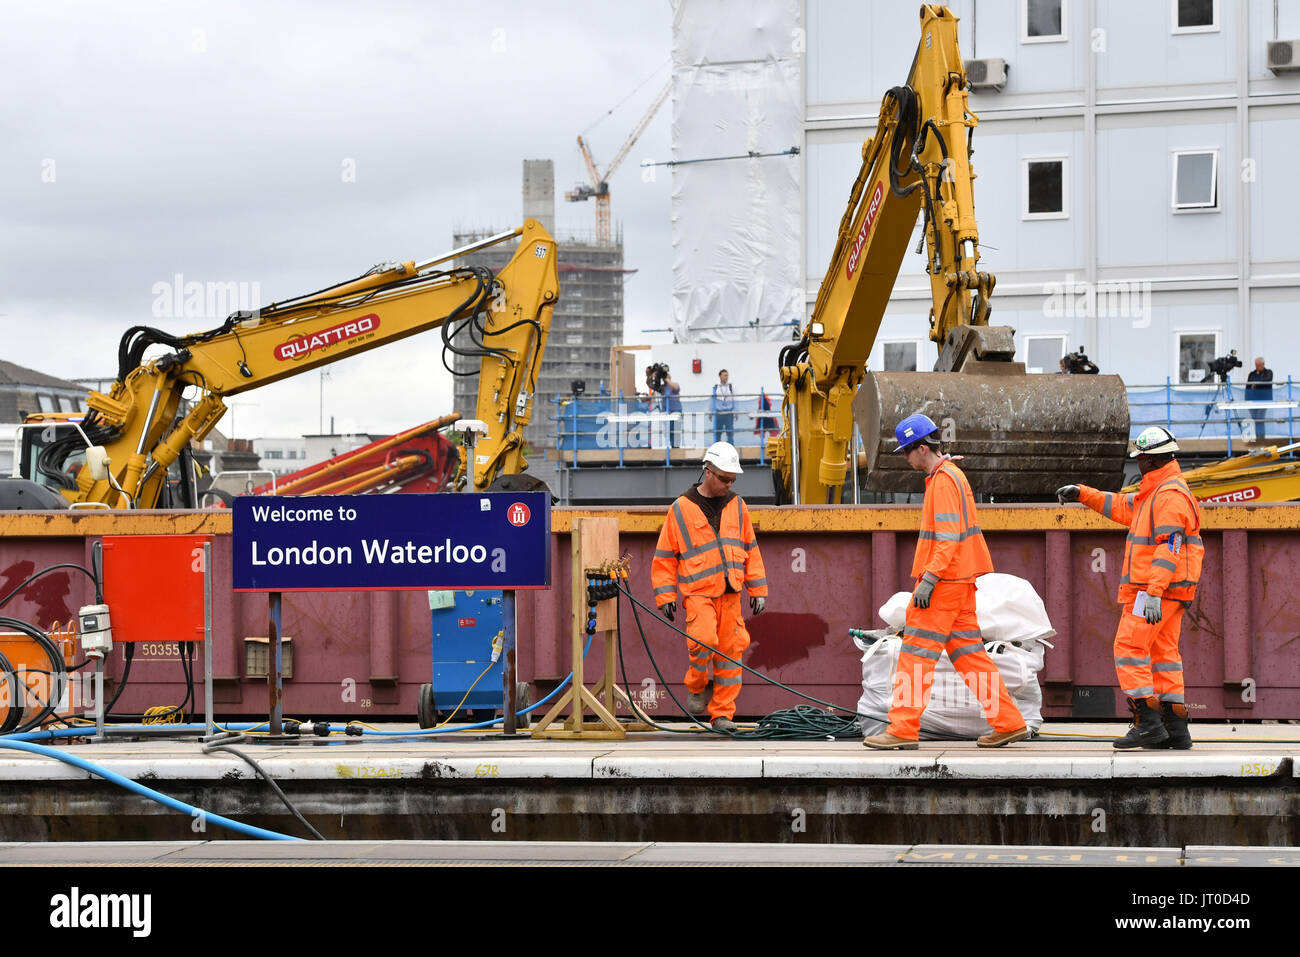 Engineering work continues at Waterloo Station in London in a major overhaul of the travel hub. Stock Photo